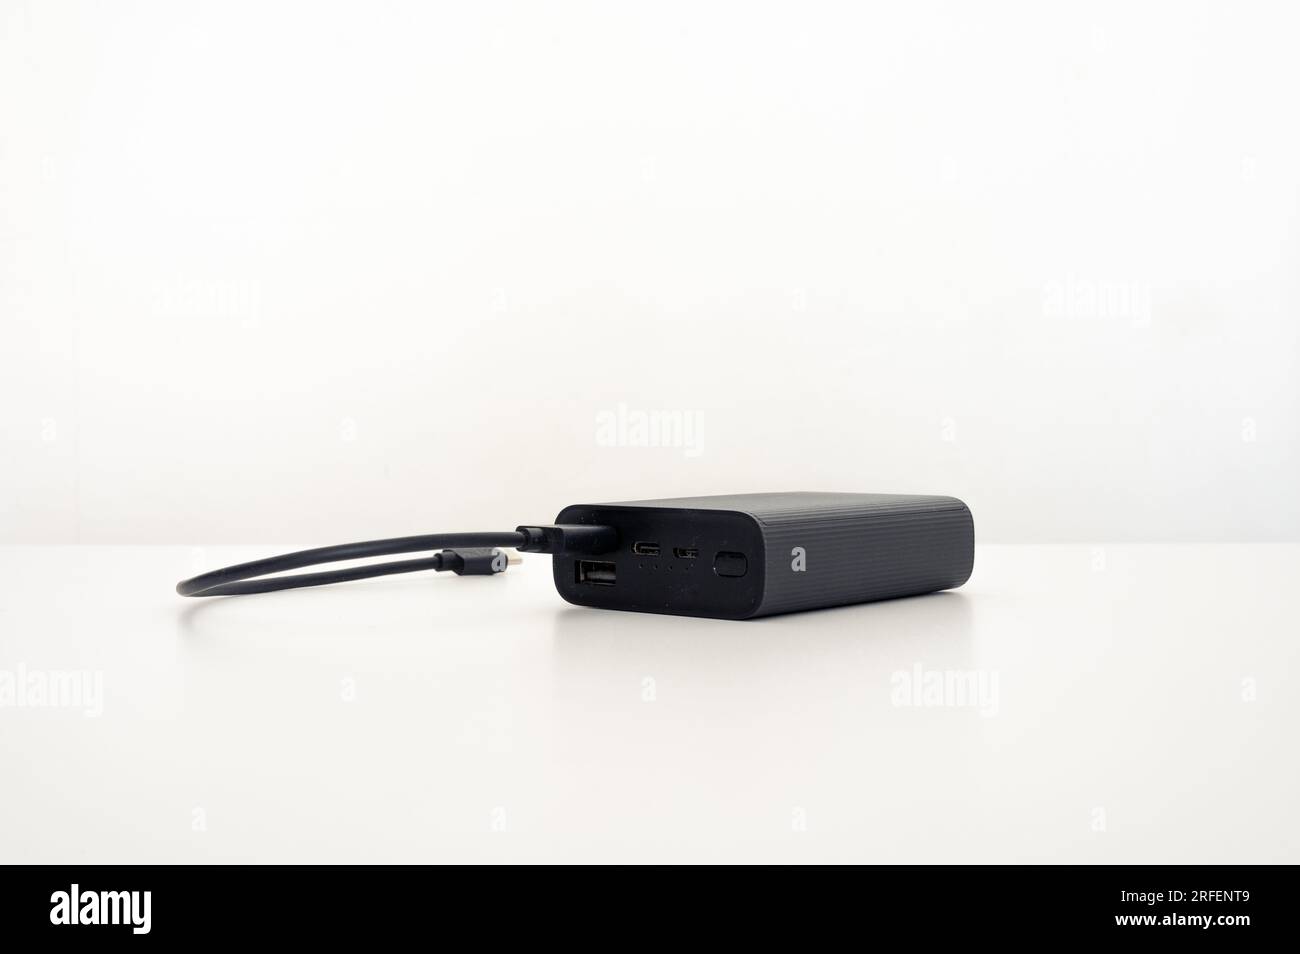 Black mobile charger on the table with one black connected cable: usb type-c. White background. Stock Photo